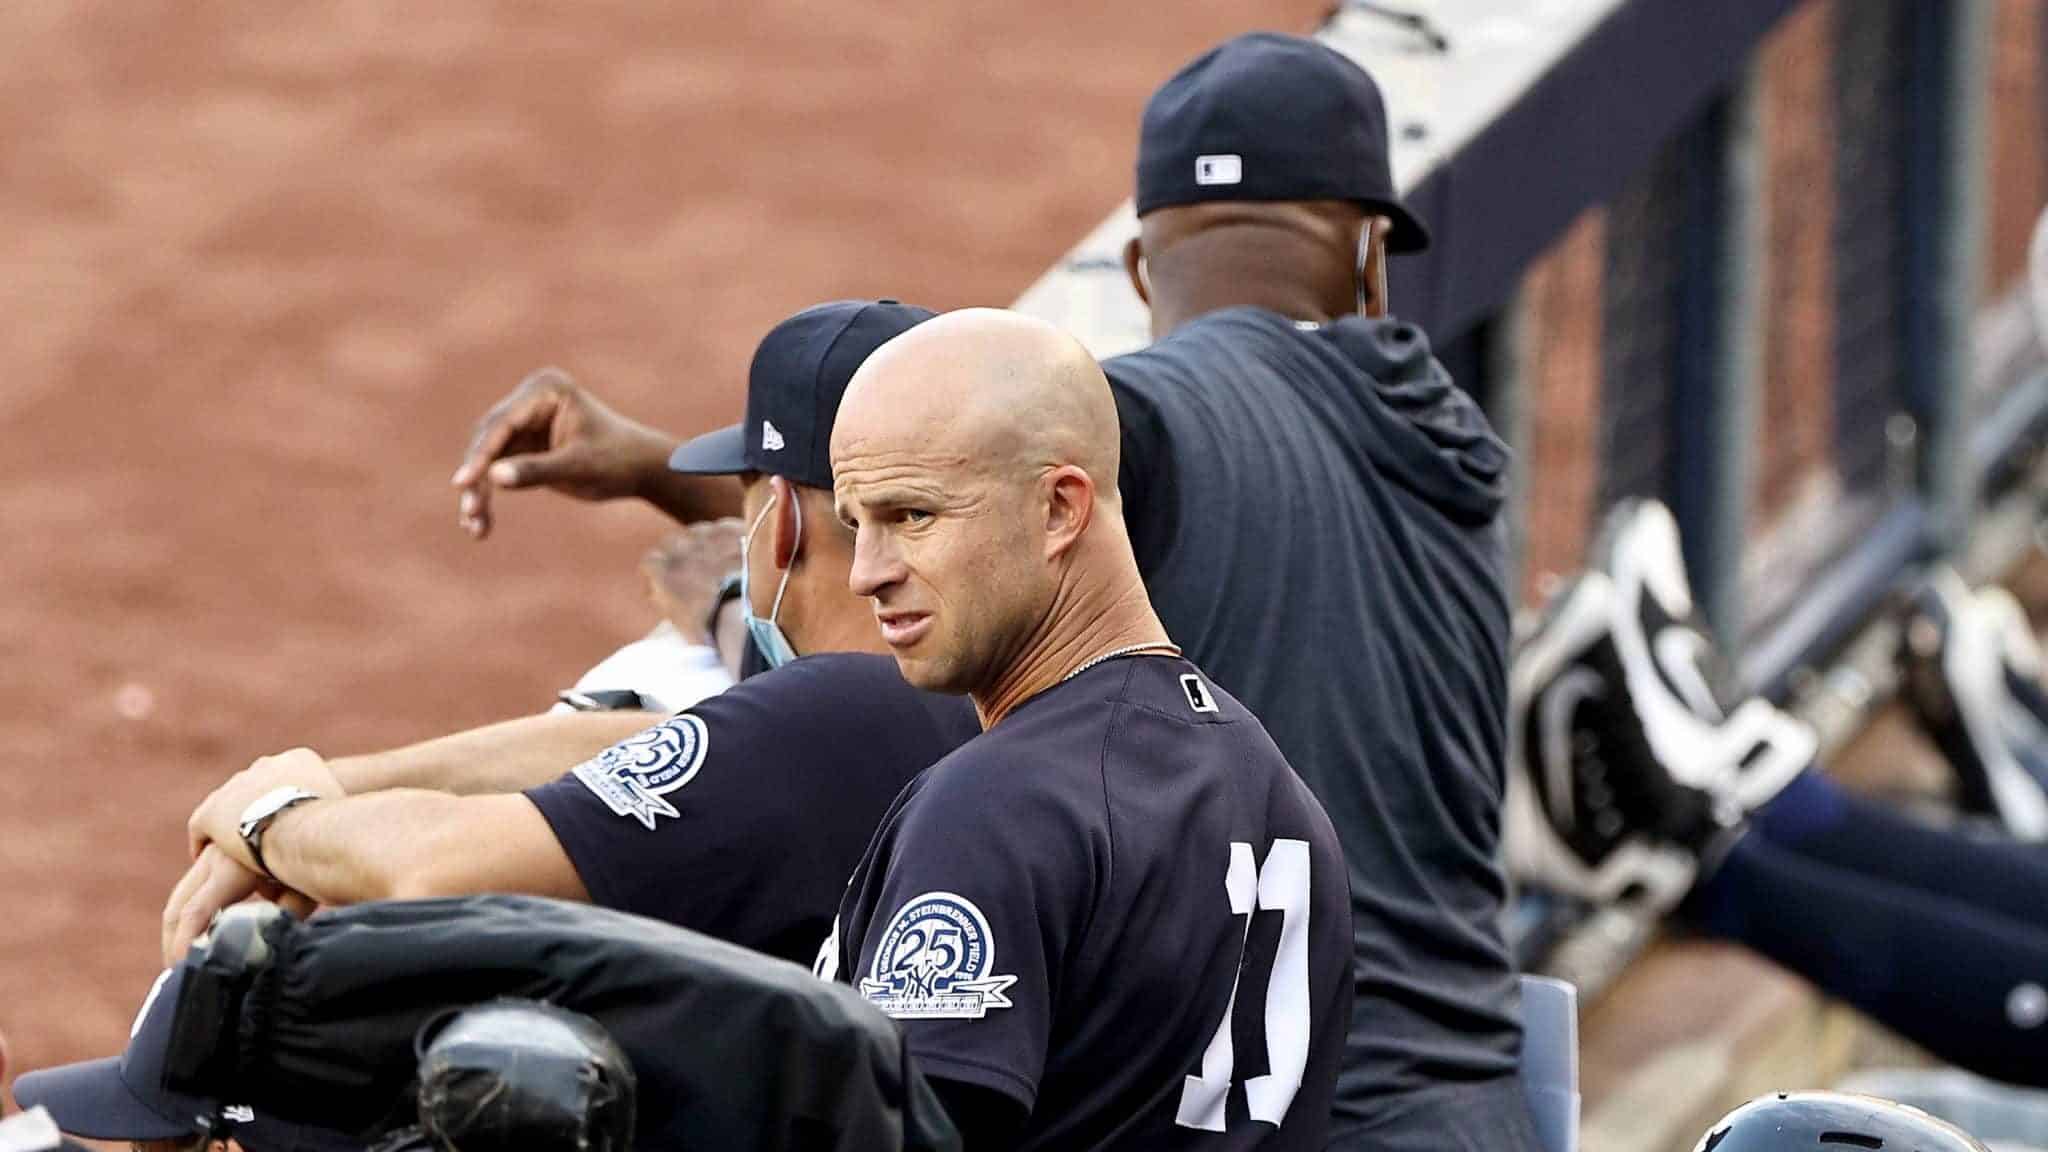 NEW YORK, NEW YORK - JULY 20: Brett Gardner #11 of the New York Yankees looks on from the dugout in the first inning against the Philadelphia Phillies during a Summer Camp game at Yankee Stadium on July 20, 2020 in the Bronx borough of New York City.